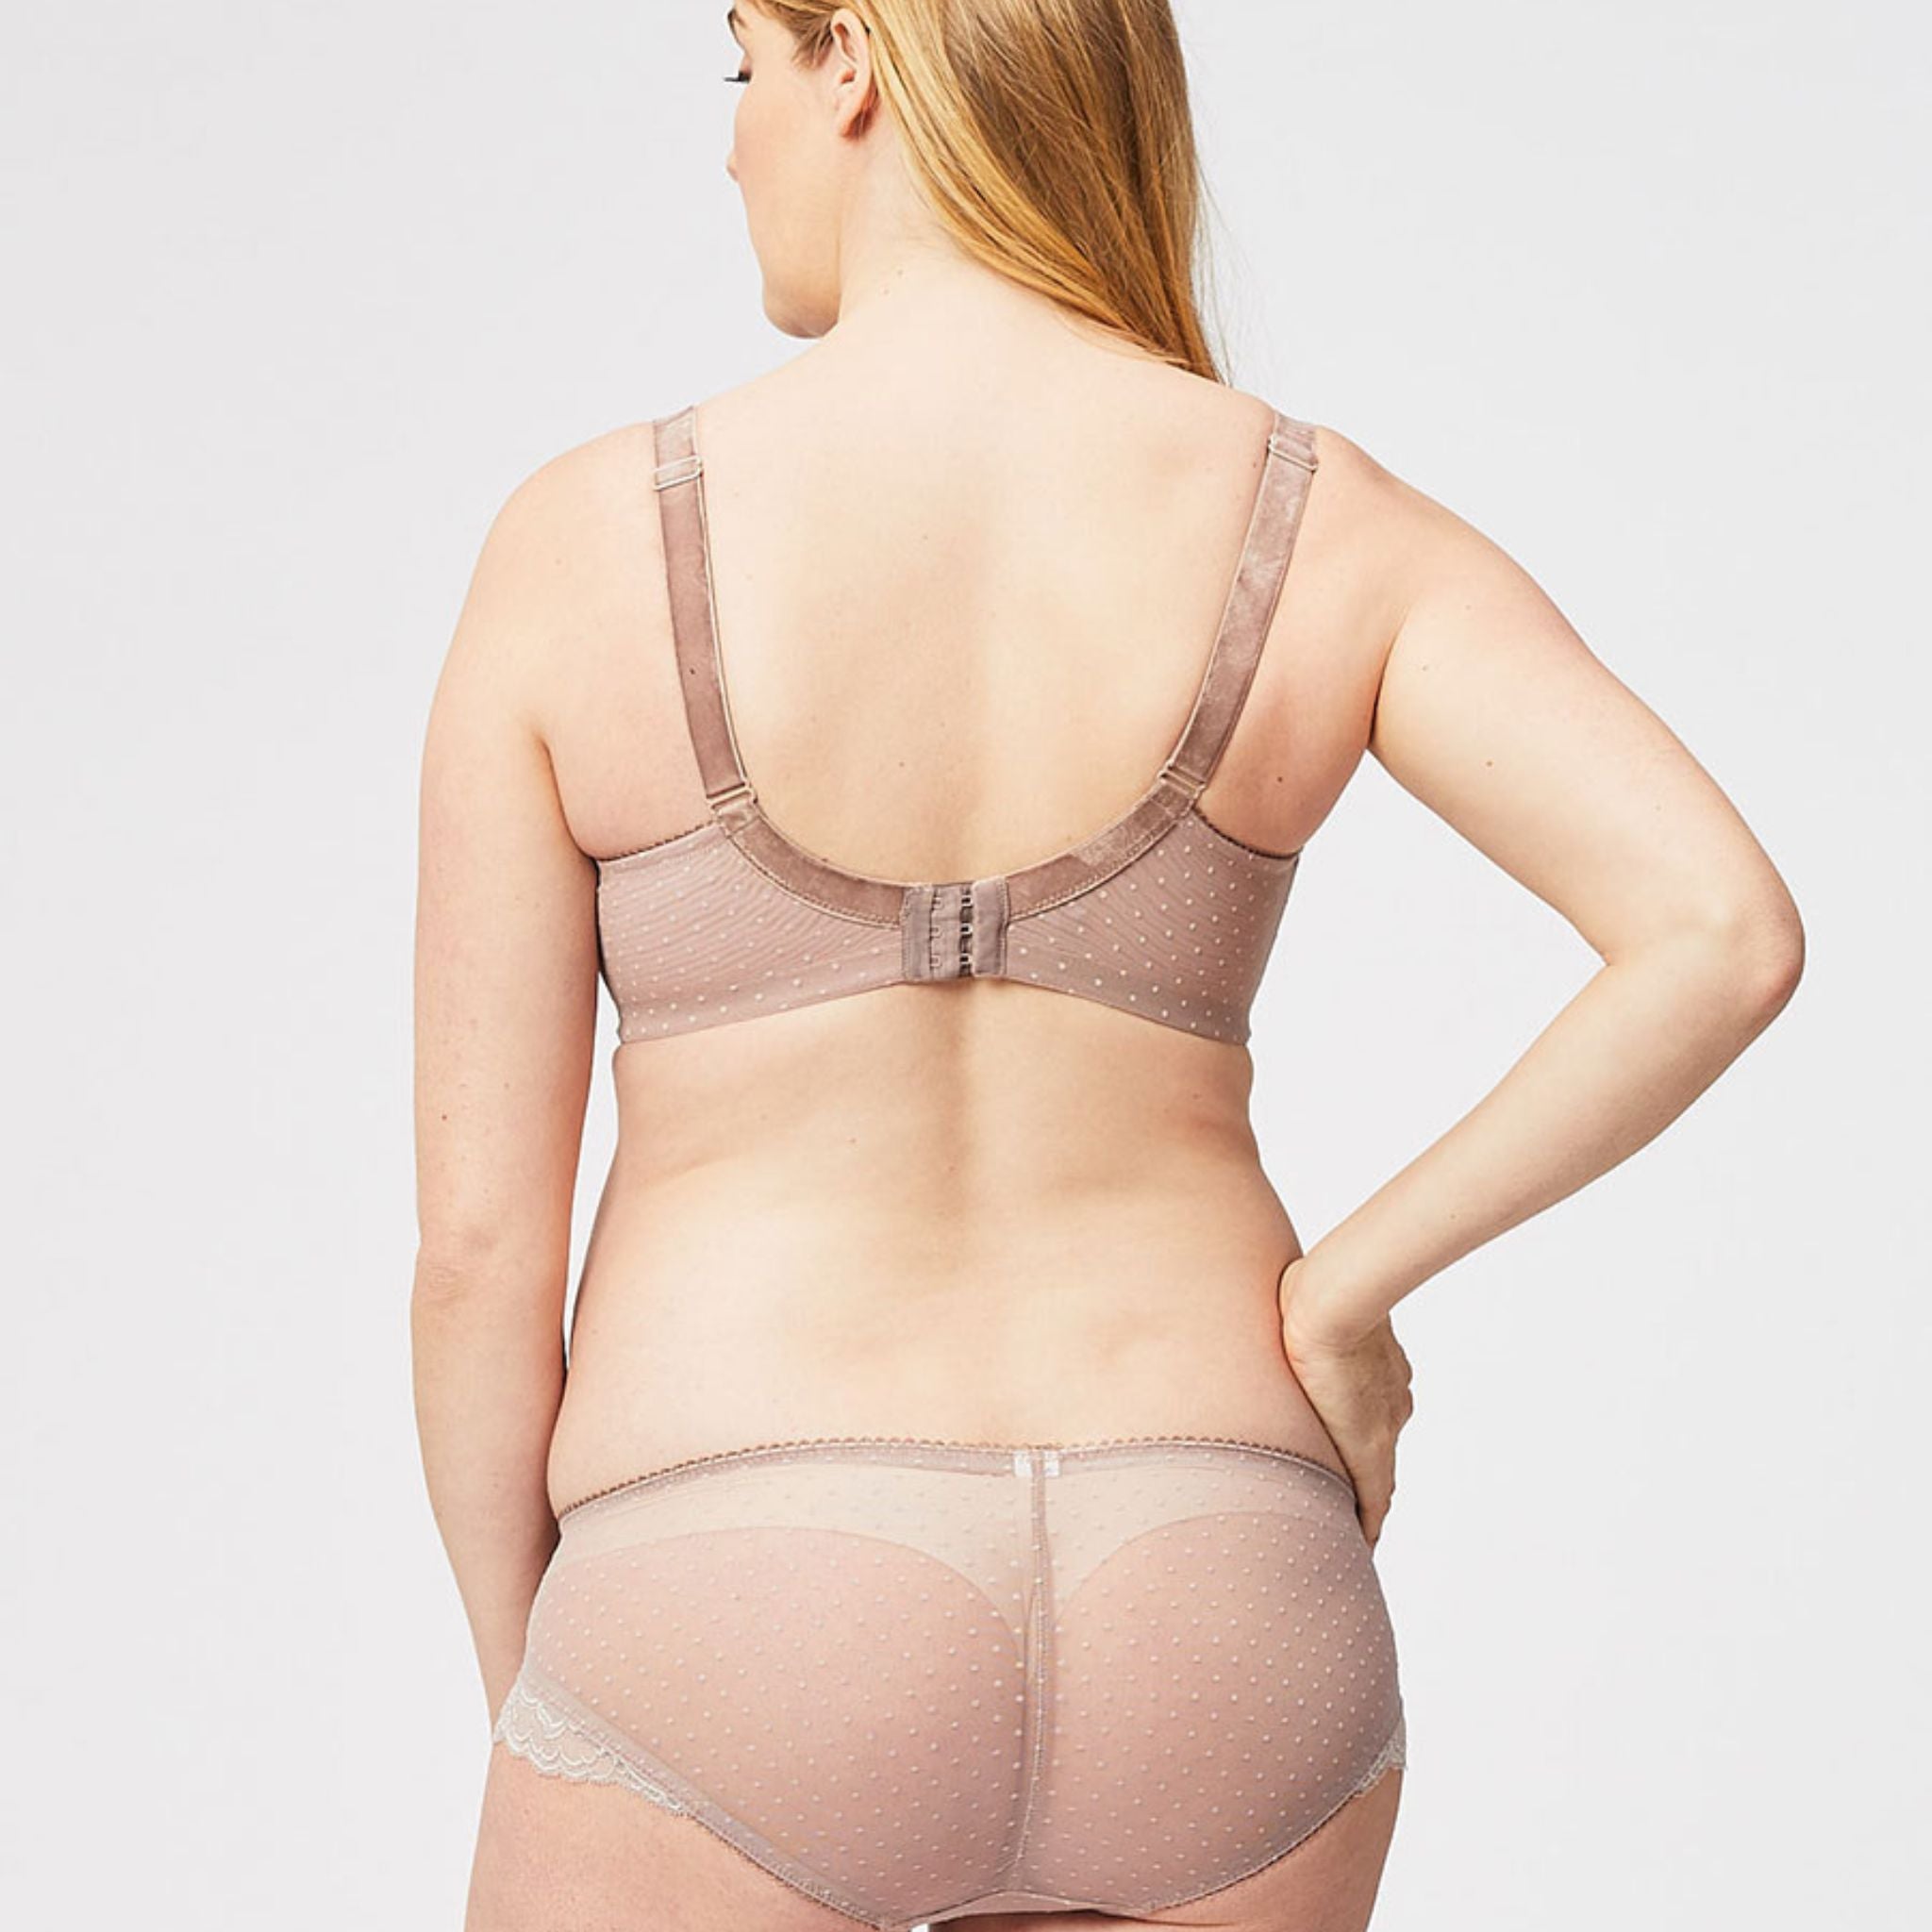 TimTams is the perfect work or evening bra that delivers the perfect mix of sophistication and versatility! This flexible wire lace top cup and spot mesh body is the perfect all day bra for women who desire a shapely profile! A rounded balconette shape bra with lower centre front. Featuring cotton-lined cups, wider short stretch velvet straps for comfort, laced edge stretch in the cup for growth and a superior lift, this bra will boost your confidence and bust line!